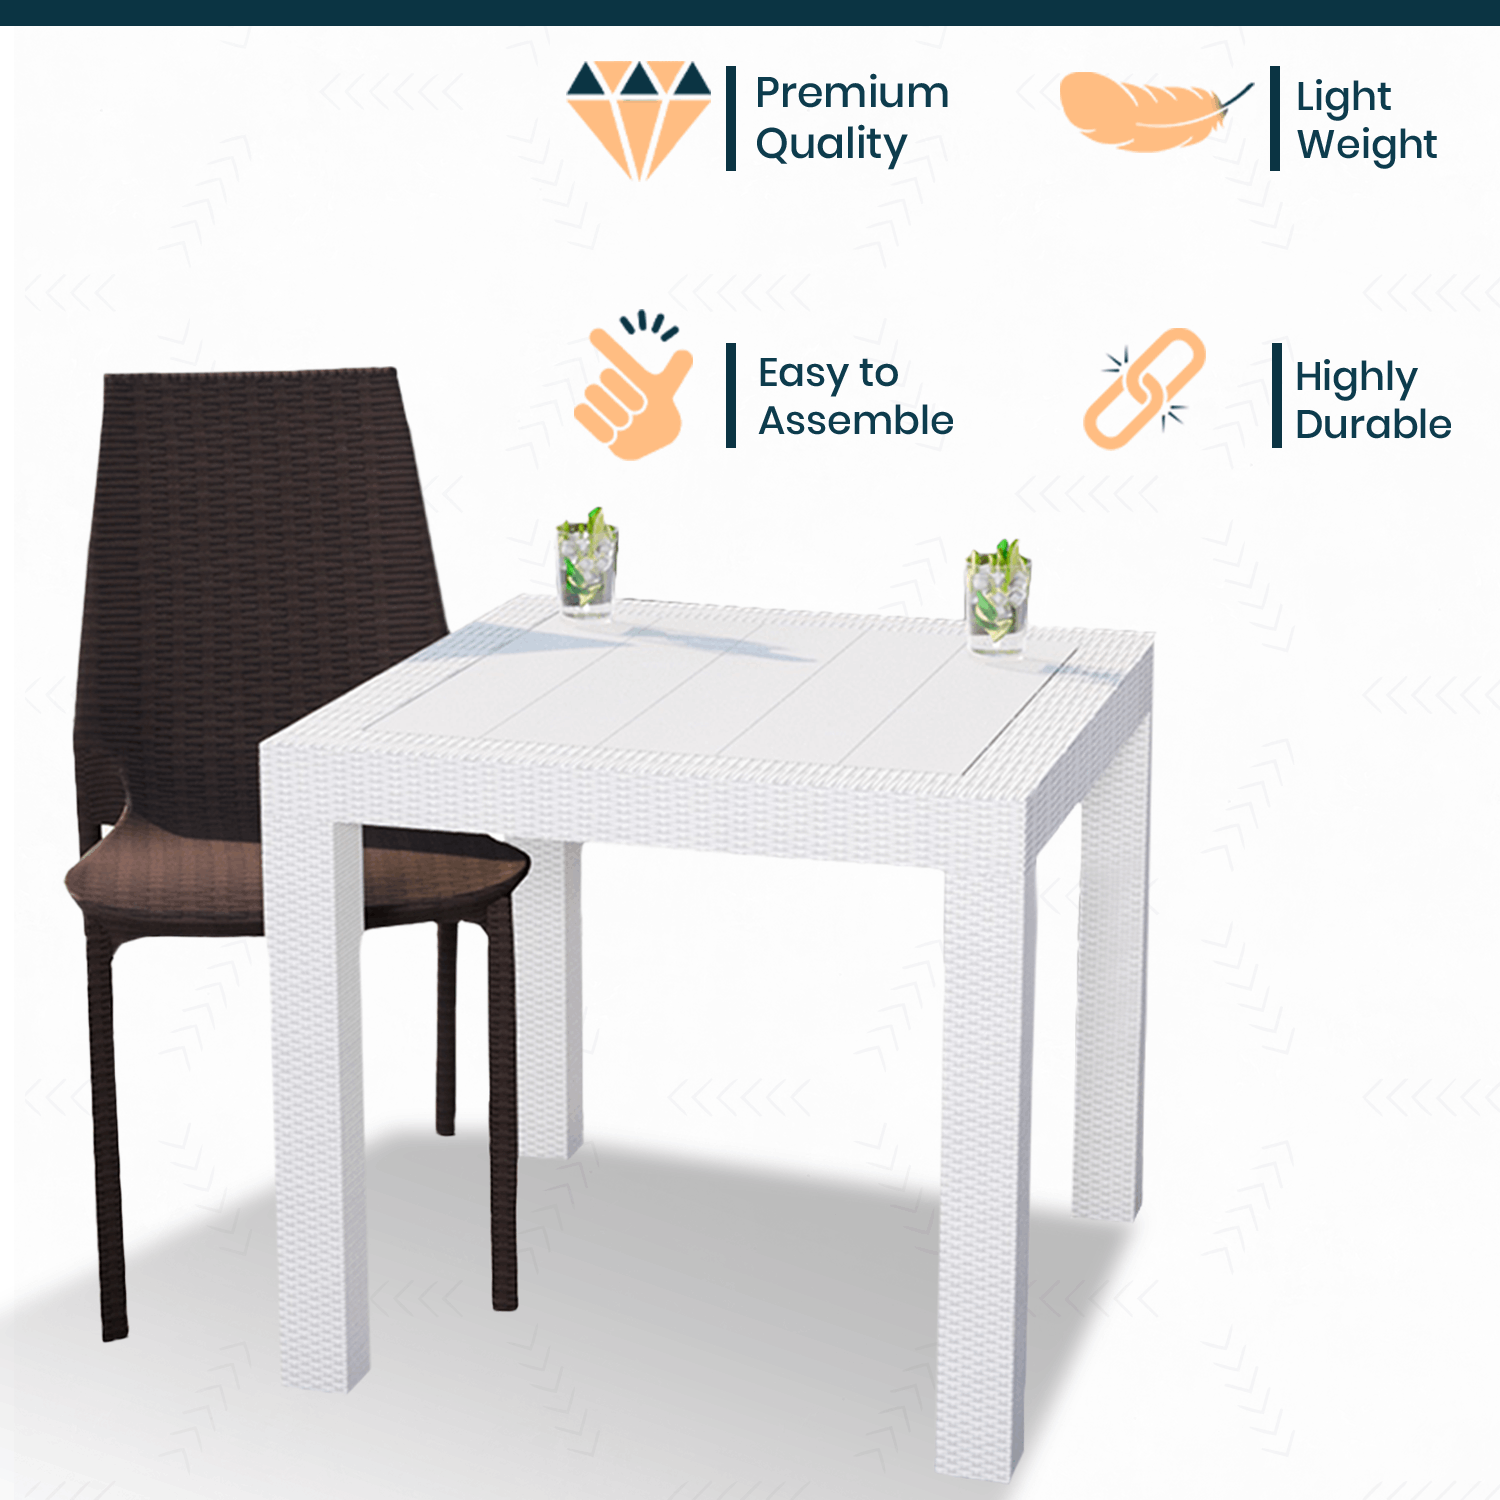 LeisureMod Kent Mid-Century Modern Weave Design 2-Piece Outdoor Patio Dining Set with Plastic Square Table and 2 Stackable Chairs for Patio, Poolside, and Backyard Garden (White/Brown) - image 4 of 18